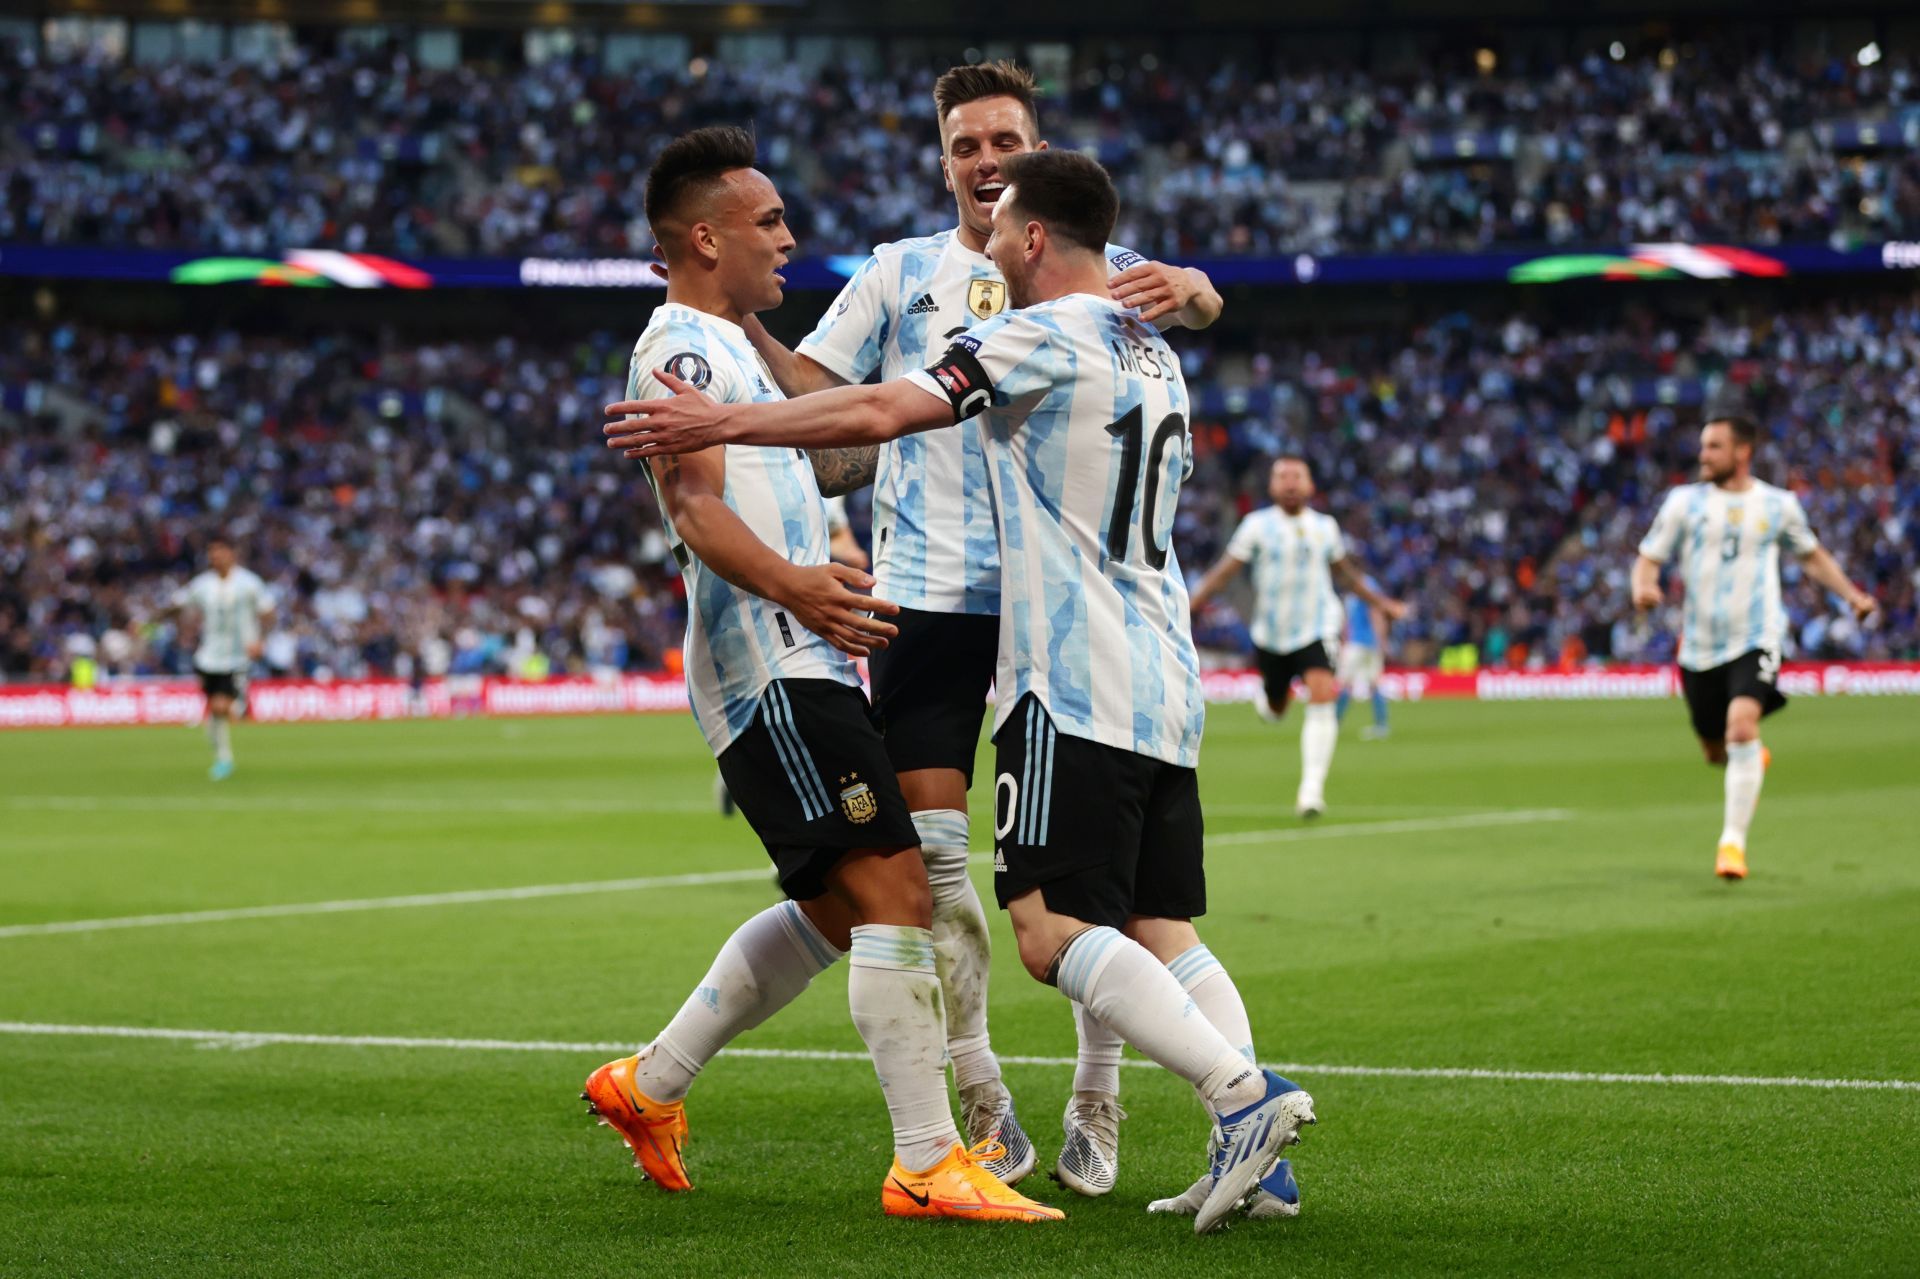 Lionel Messi and Lautaro Martinez will need to step up against Mexico